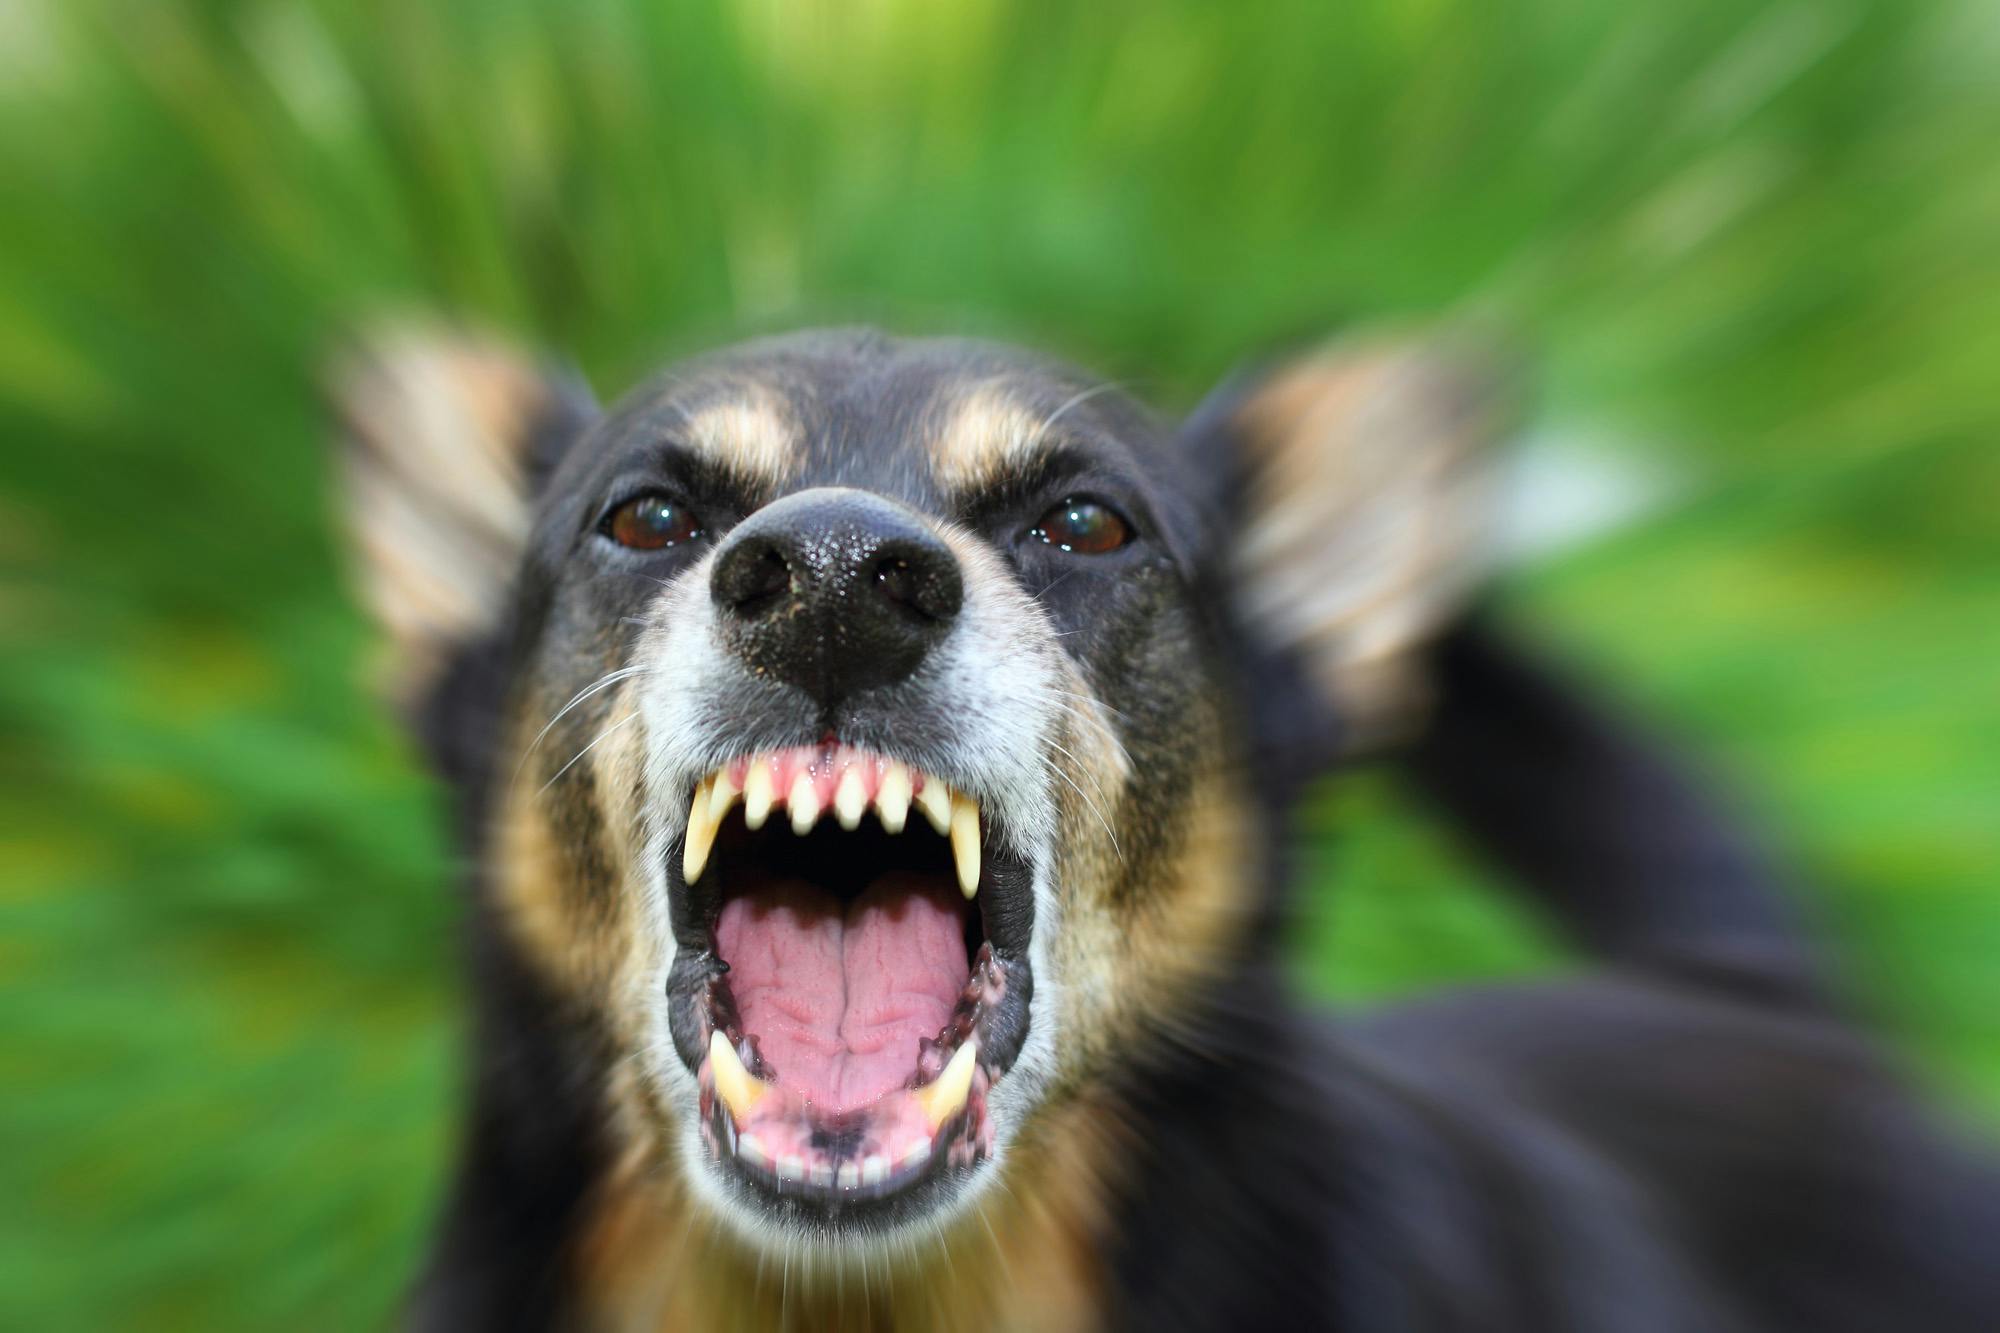 dog baring teeth with blurred green background